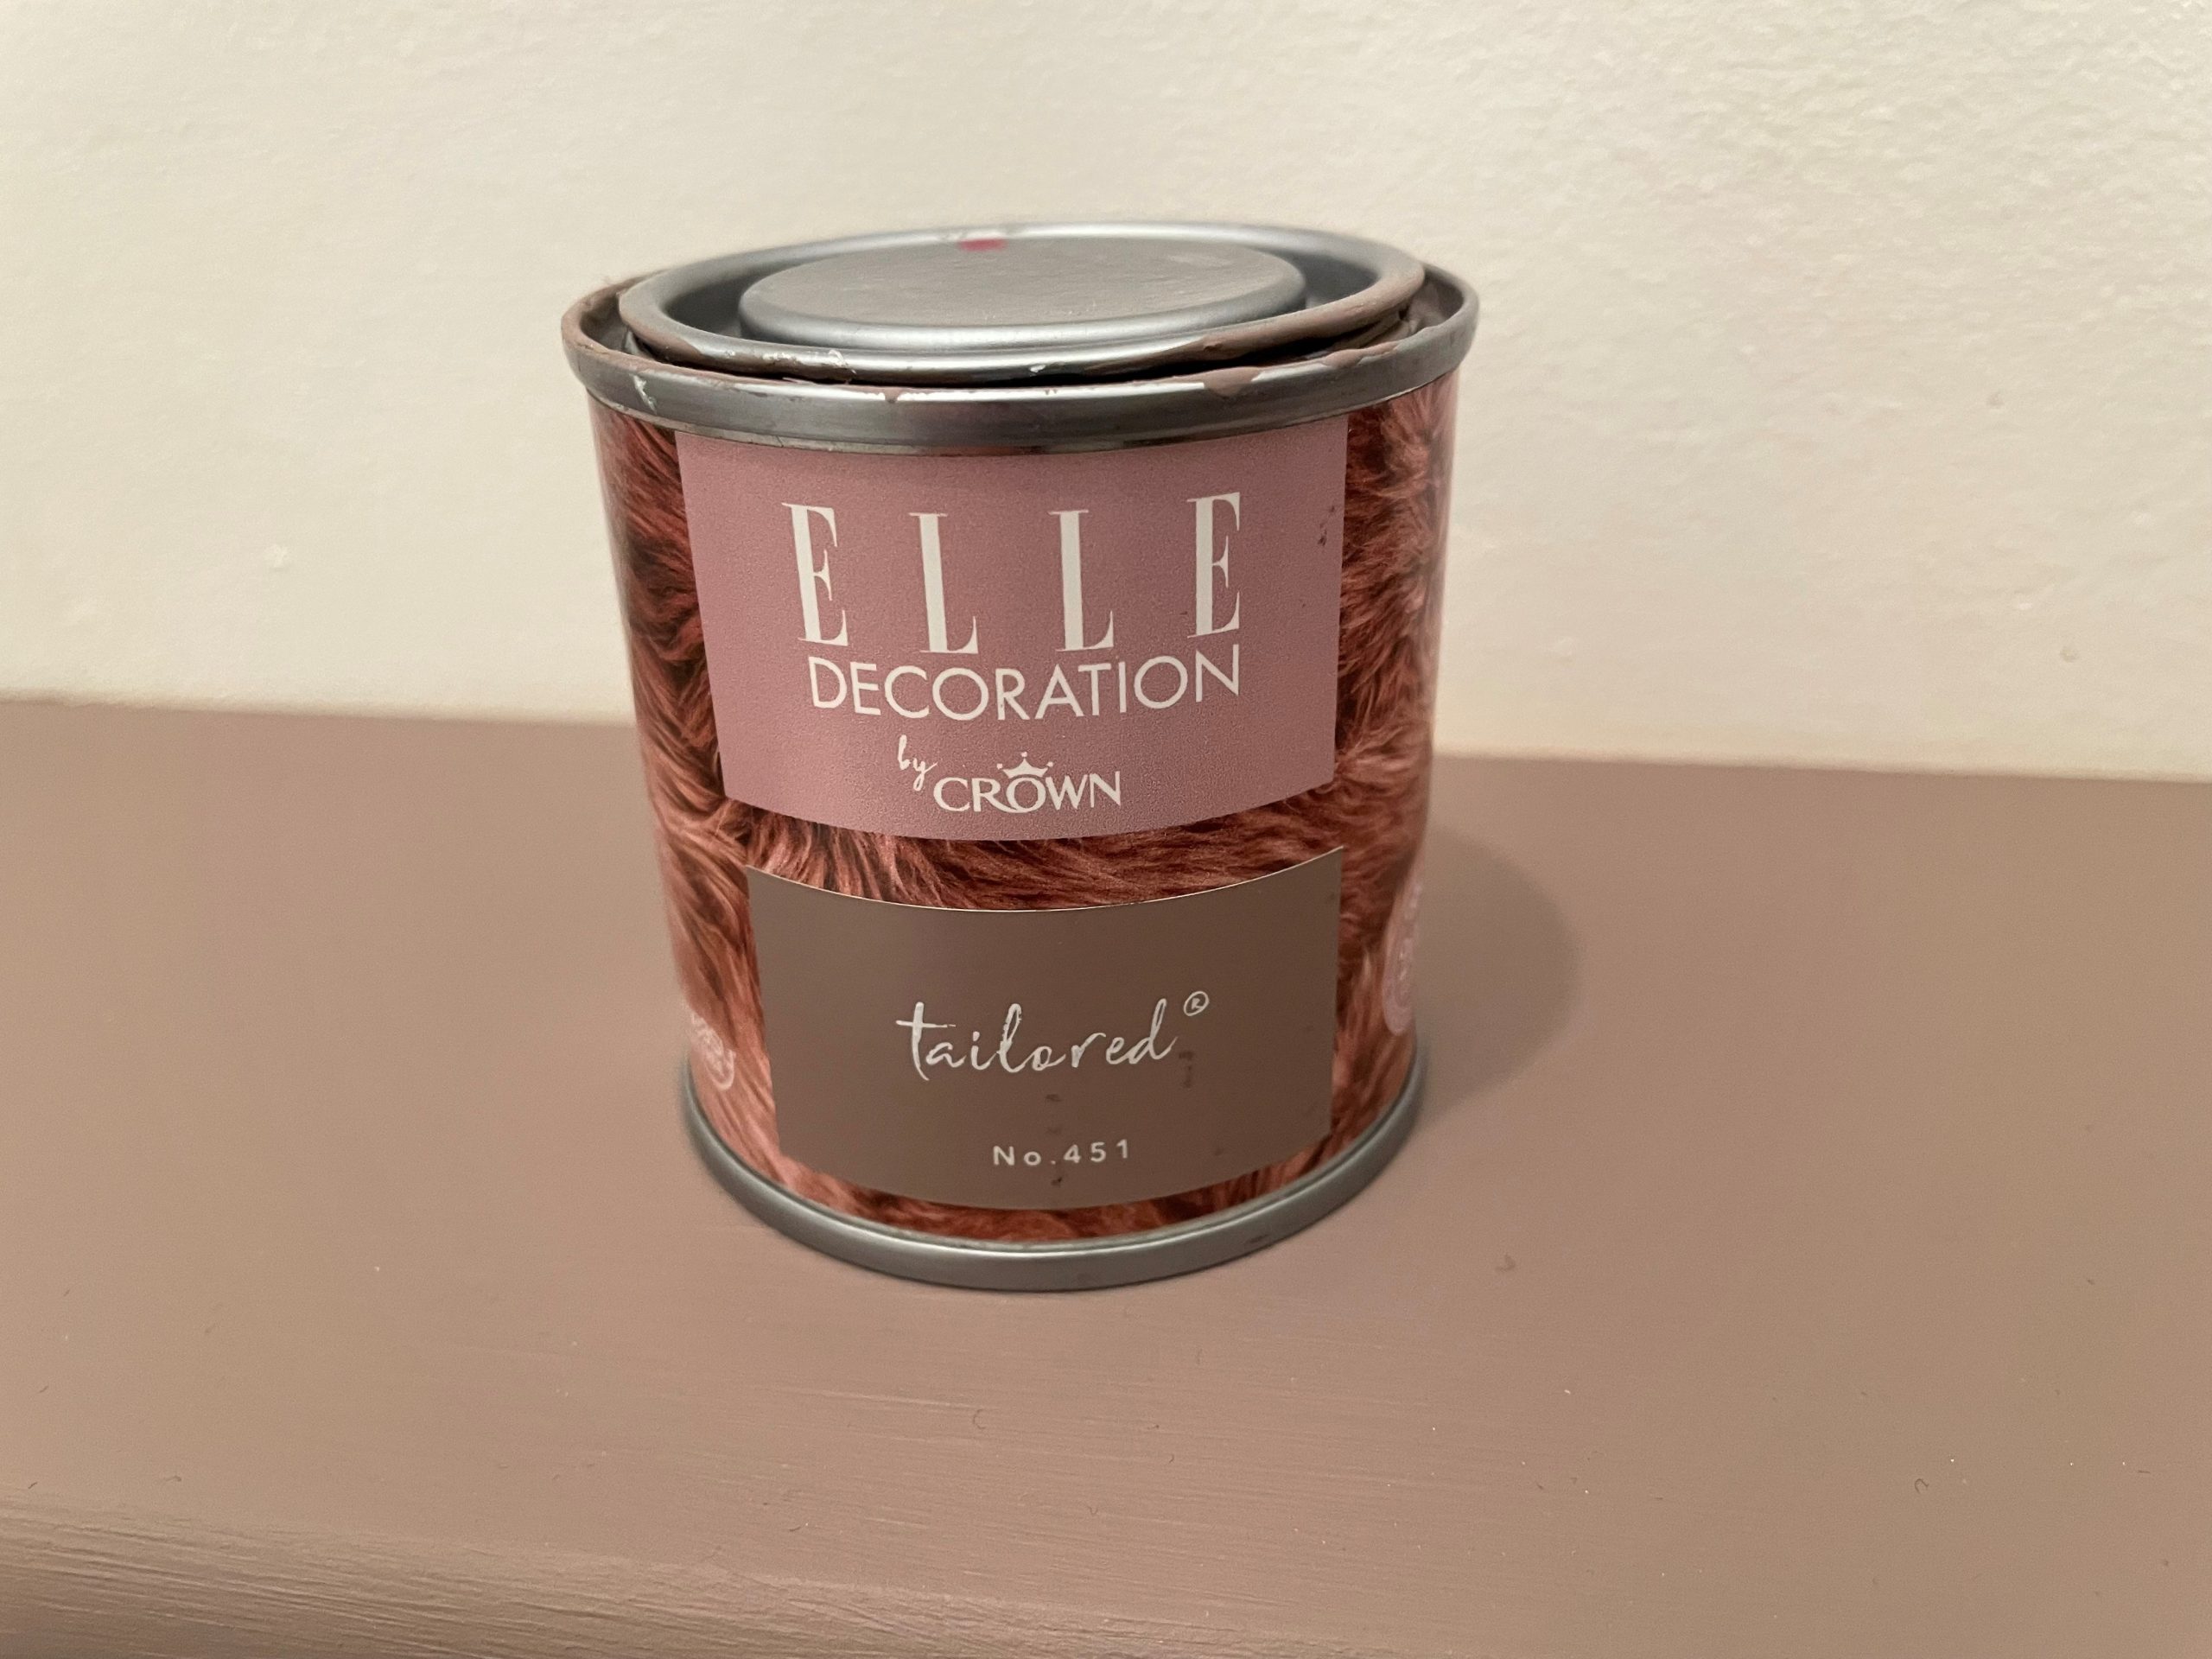 Crown Elle Decoration Paint in 'Tailored'